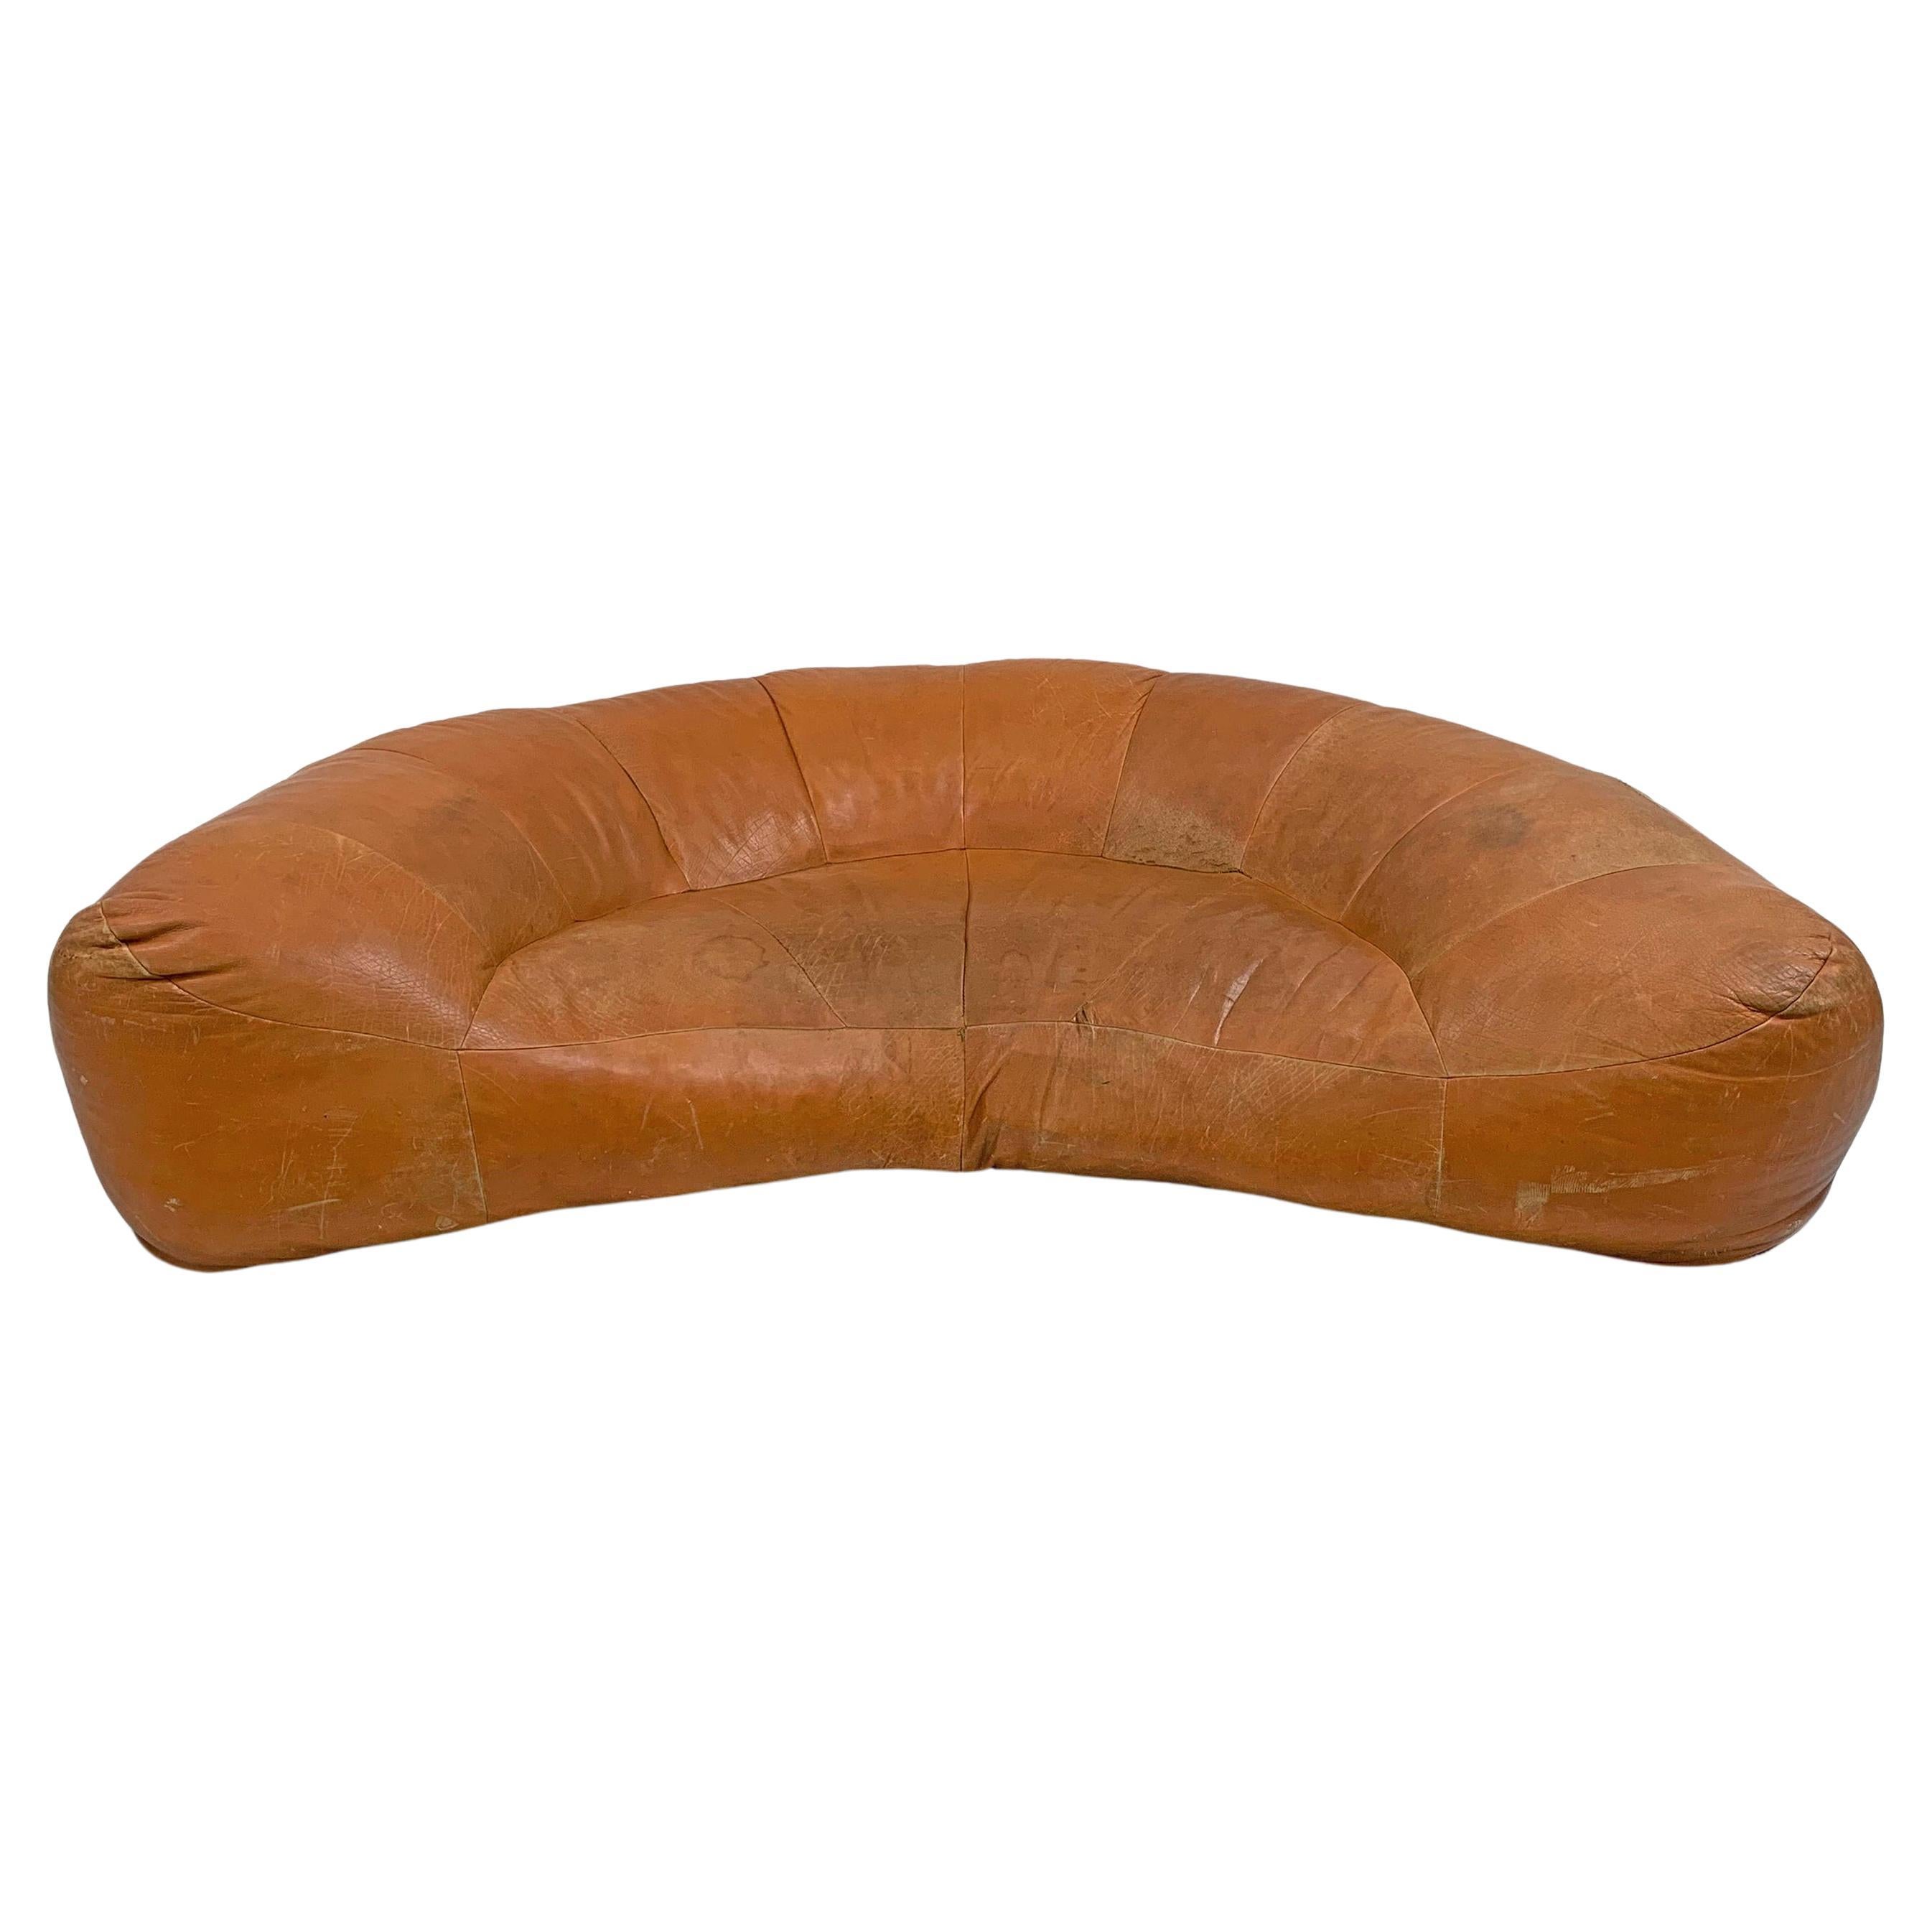 Croissant Sofa by Raphael Raffel for Honore Paris in Patinated Cognac Leather